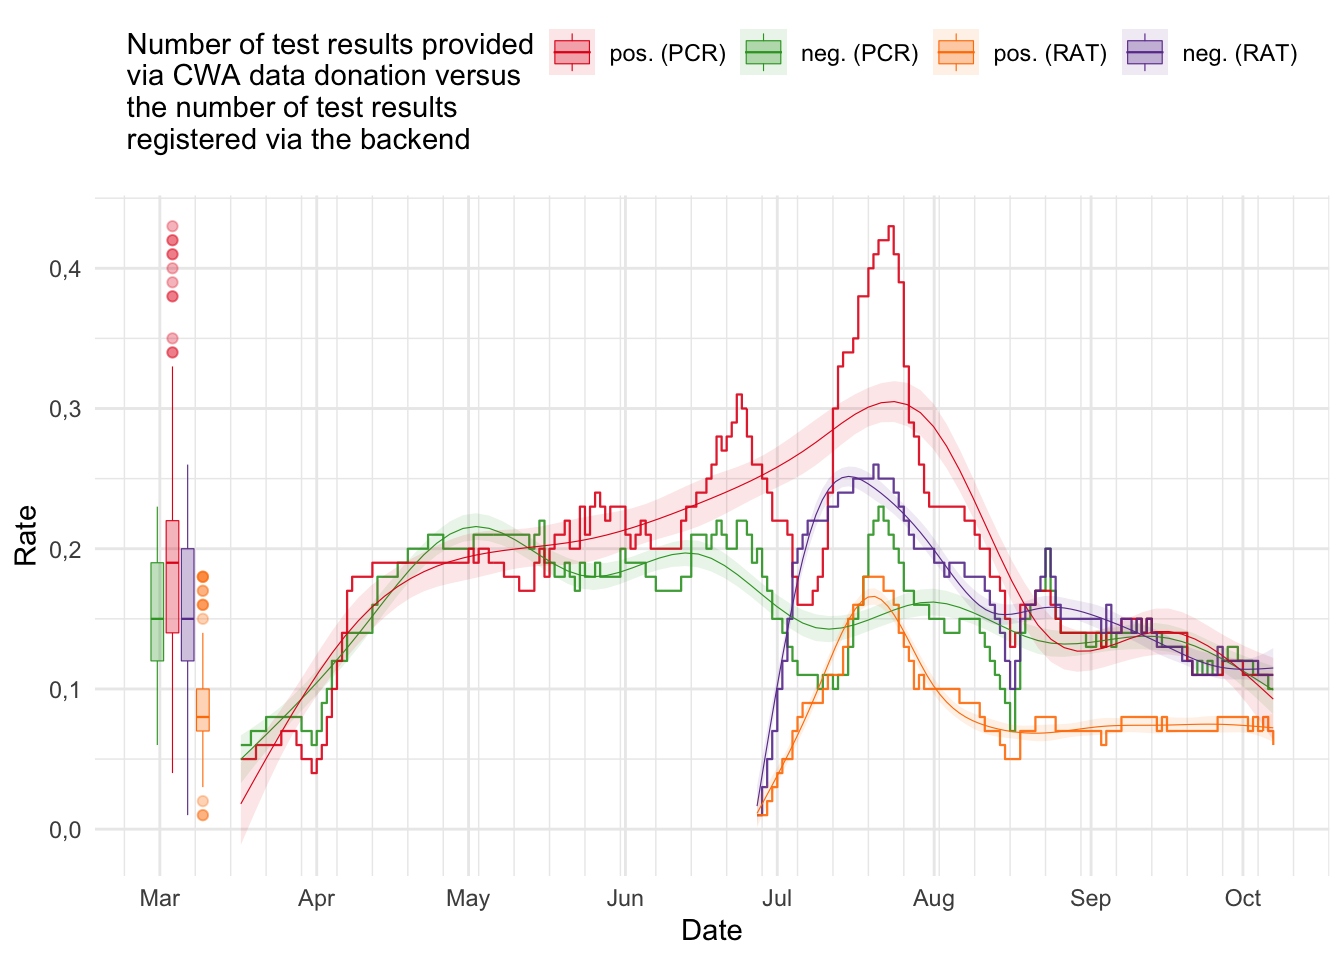 Relationship between the number of test results provided via CWA data donation and the number of test results registered via the backend (PCR/RAT and pos/neg).